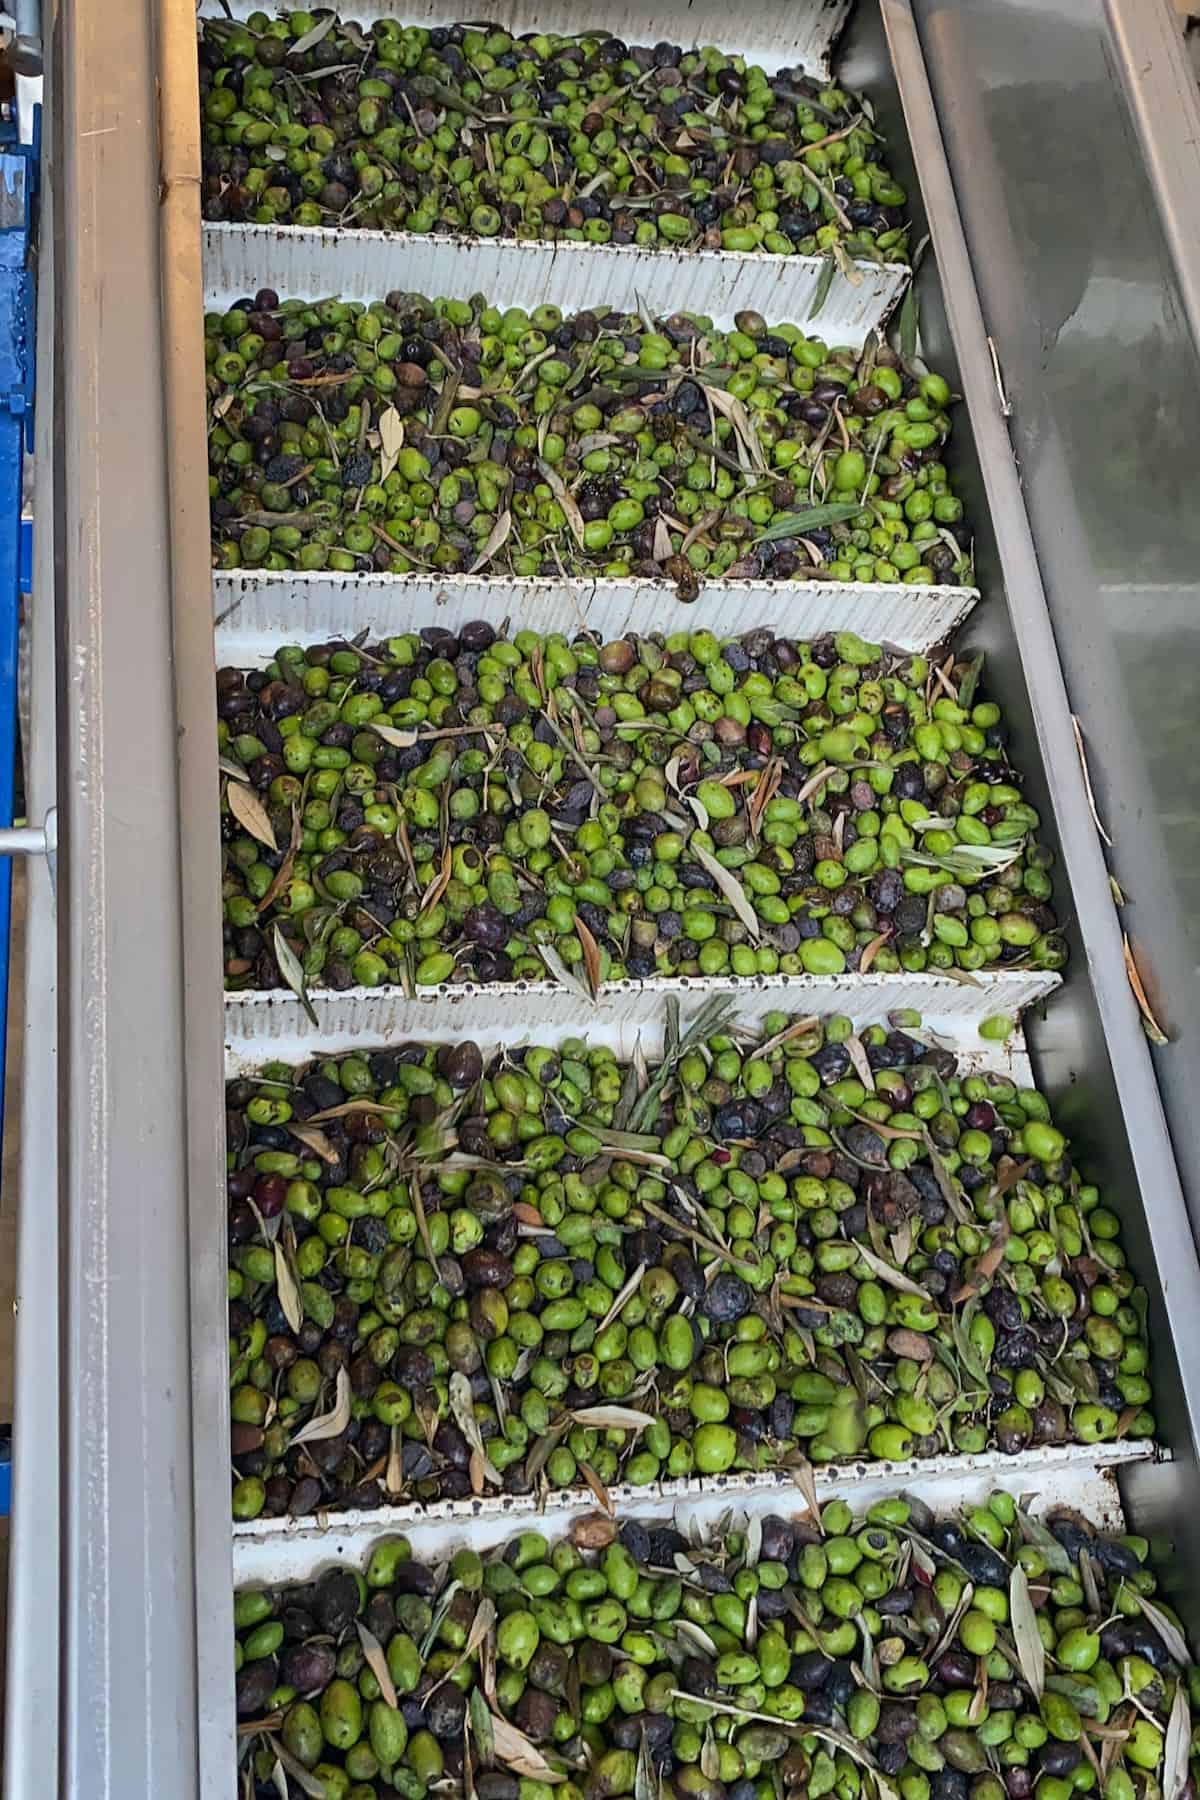 Taking olives to be processed into olive oil